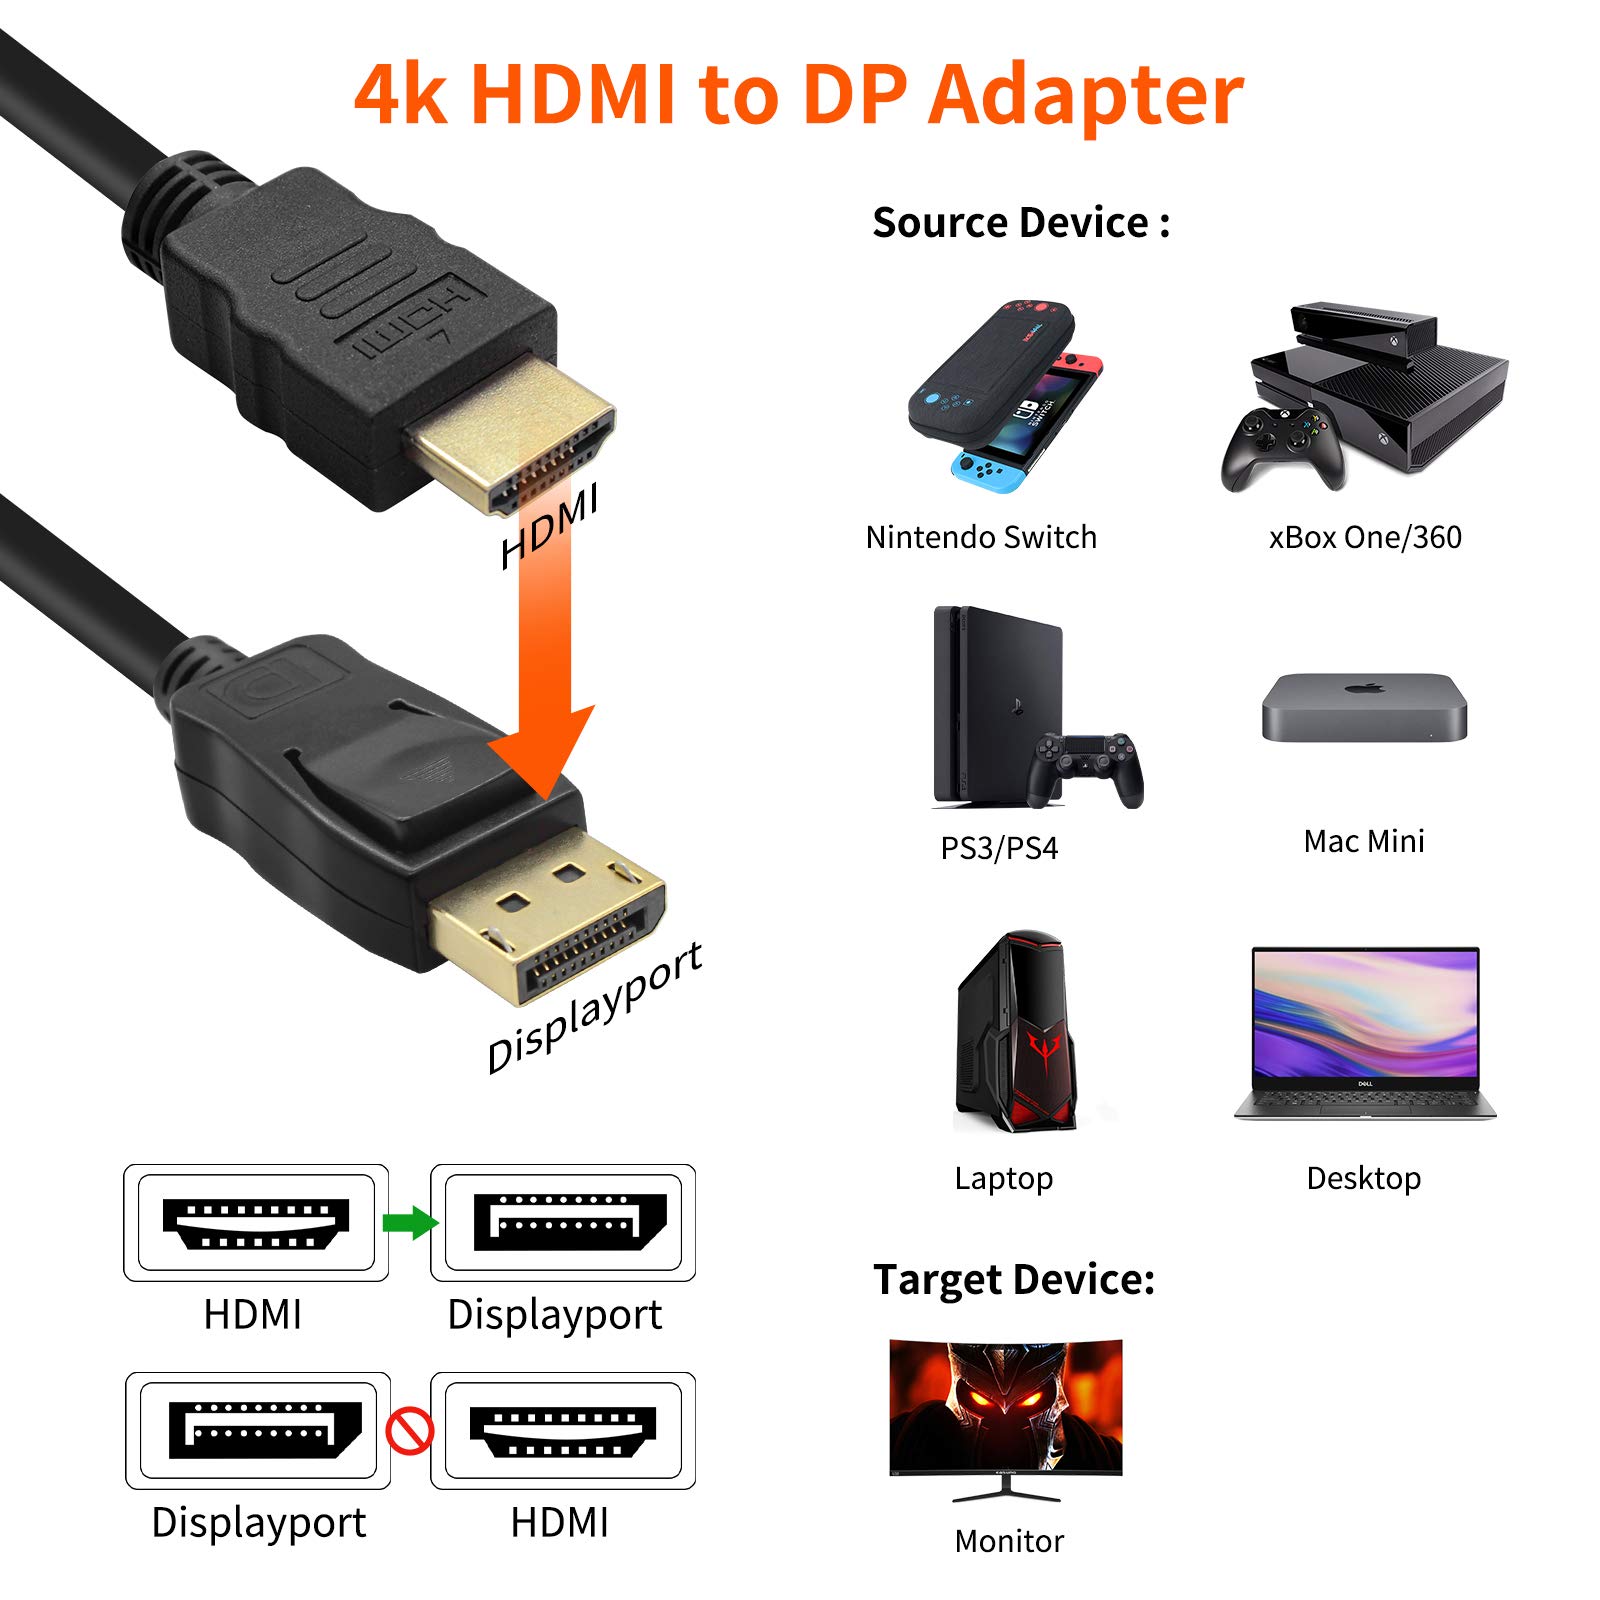 BolAAzuL Active 4K HDMI to Displayport 1.2 Converter Adapter Cable 6FT/1.8M, HDMI Source to DisplayPort Monitor Cable Unidirectional HDMI 1.4 Male to DP 1.2 Male -AHDPC